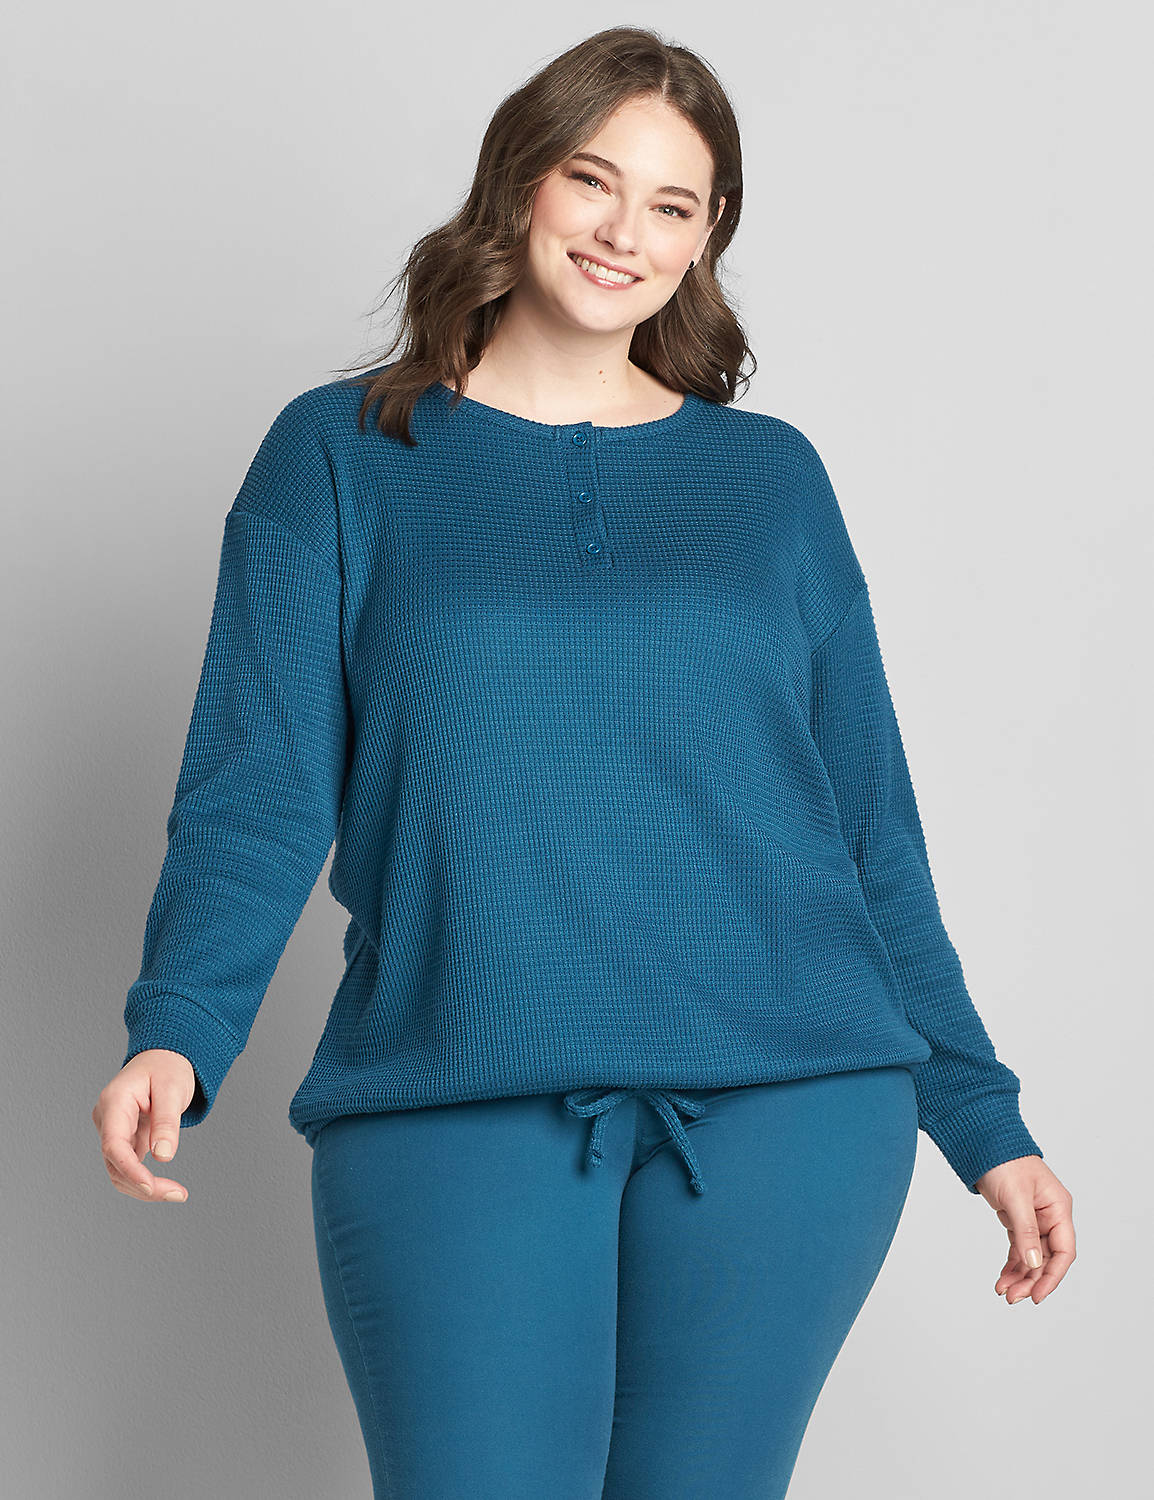 Henley Knit Top With Drawstring Hem Product Image 1